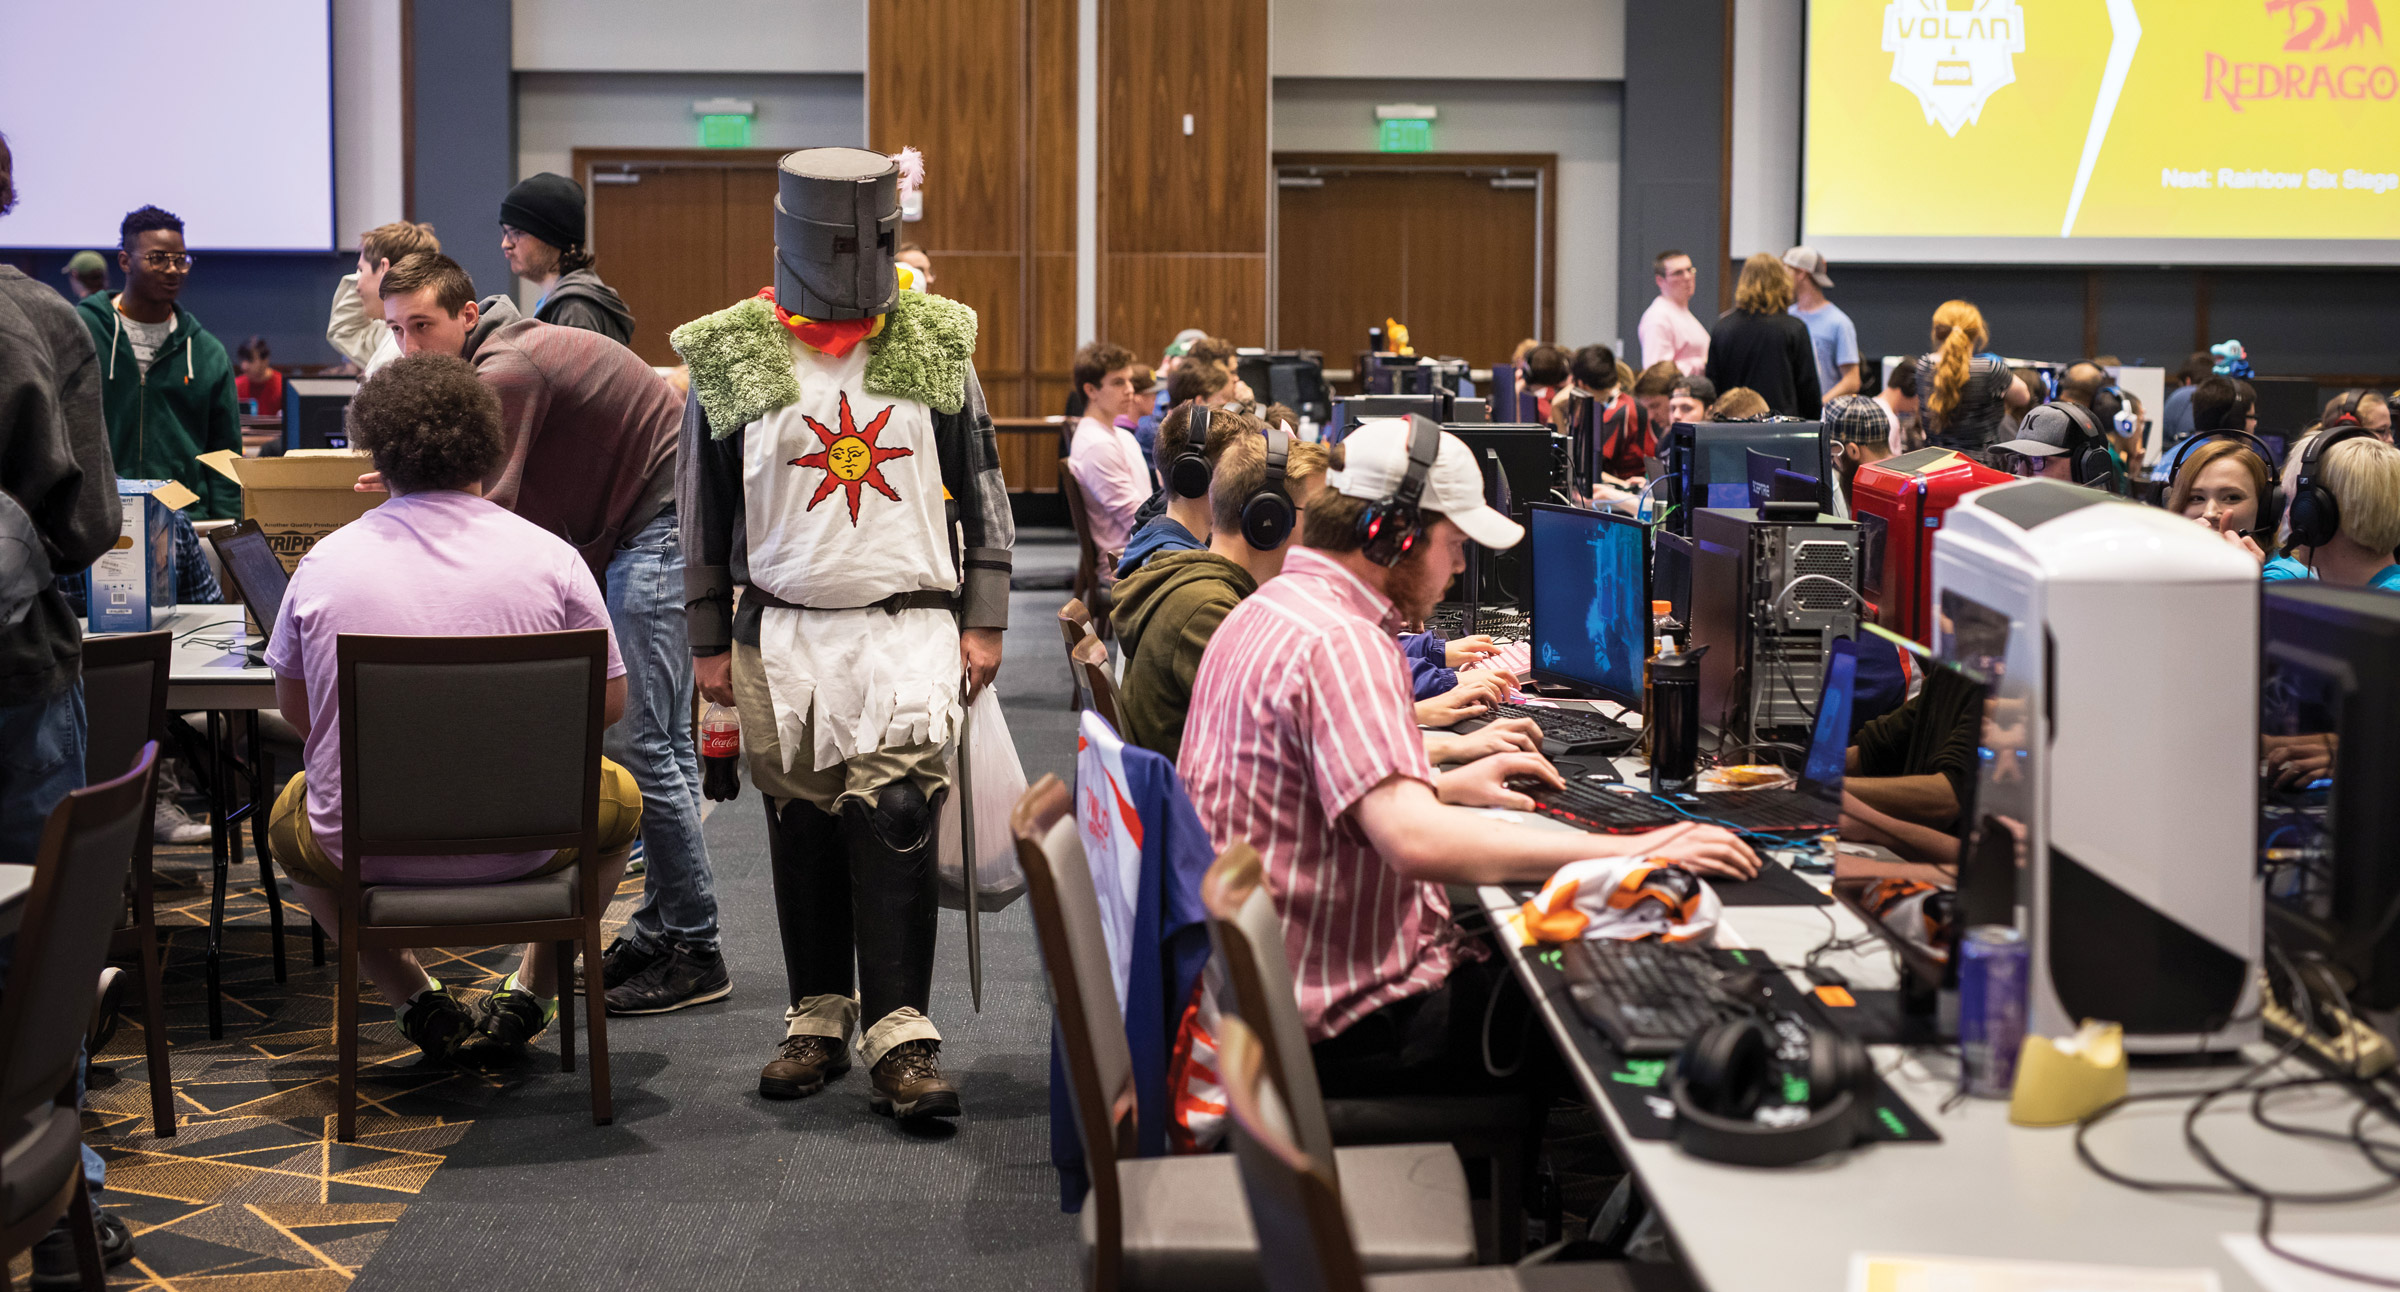 A student dressed as a knight walks between rows of gamers at PC consoles